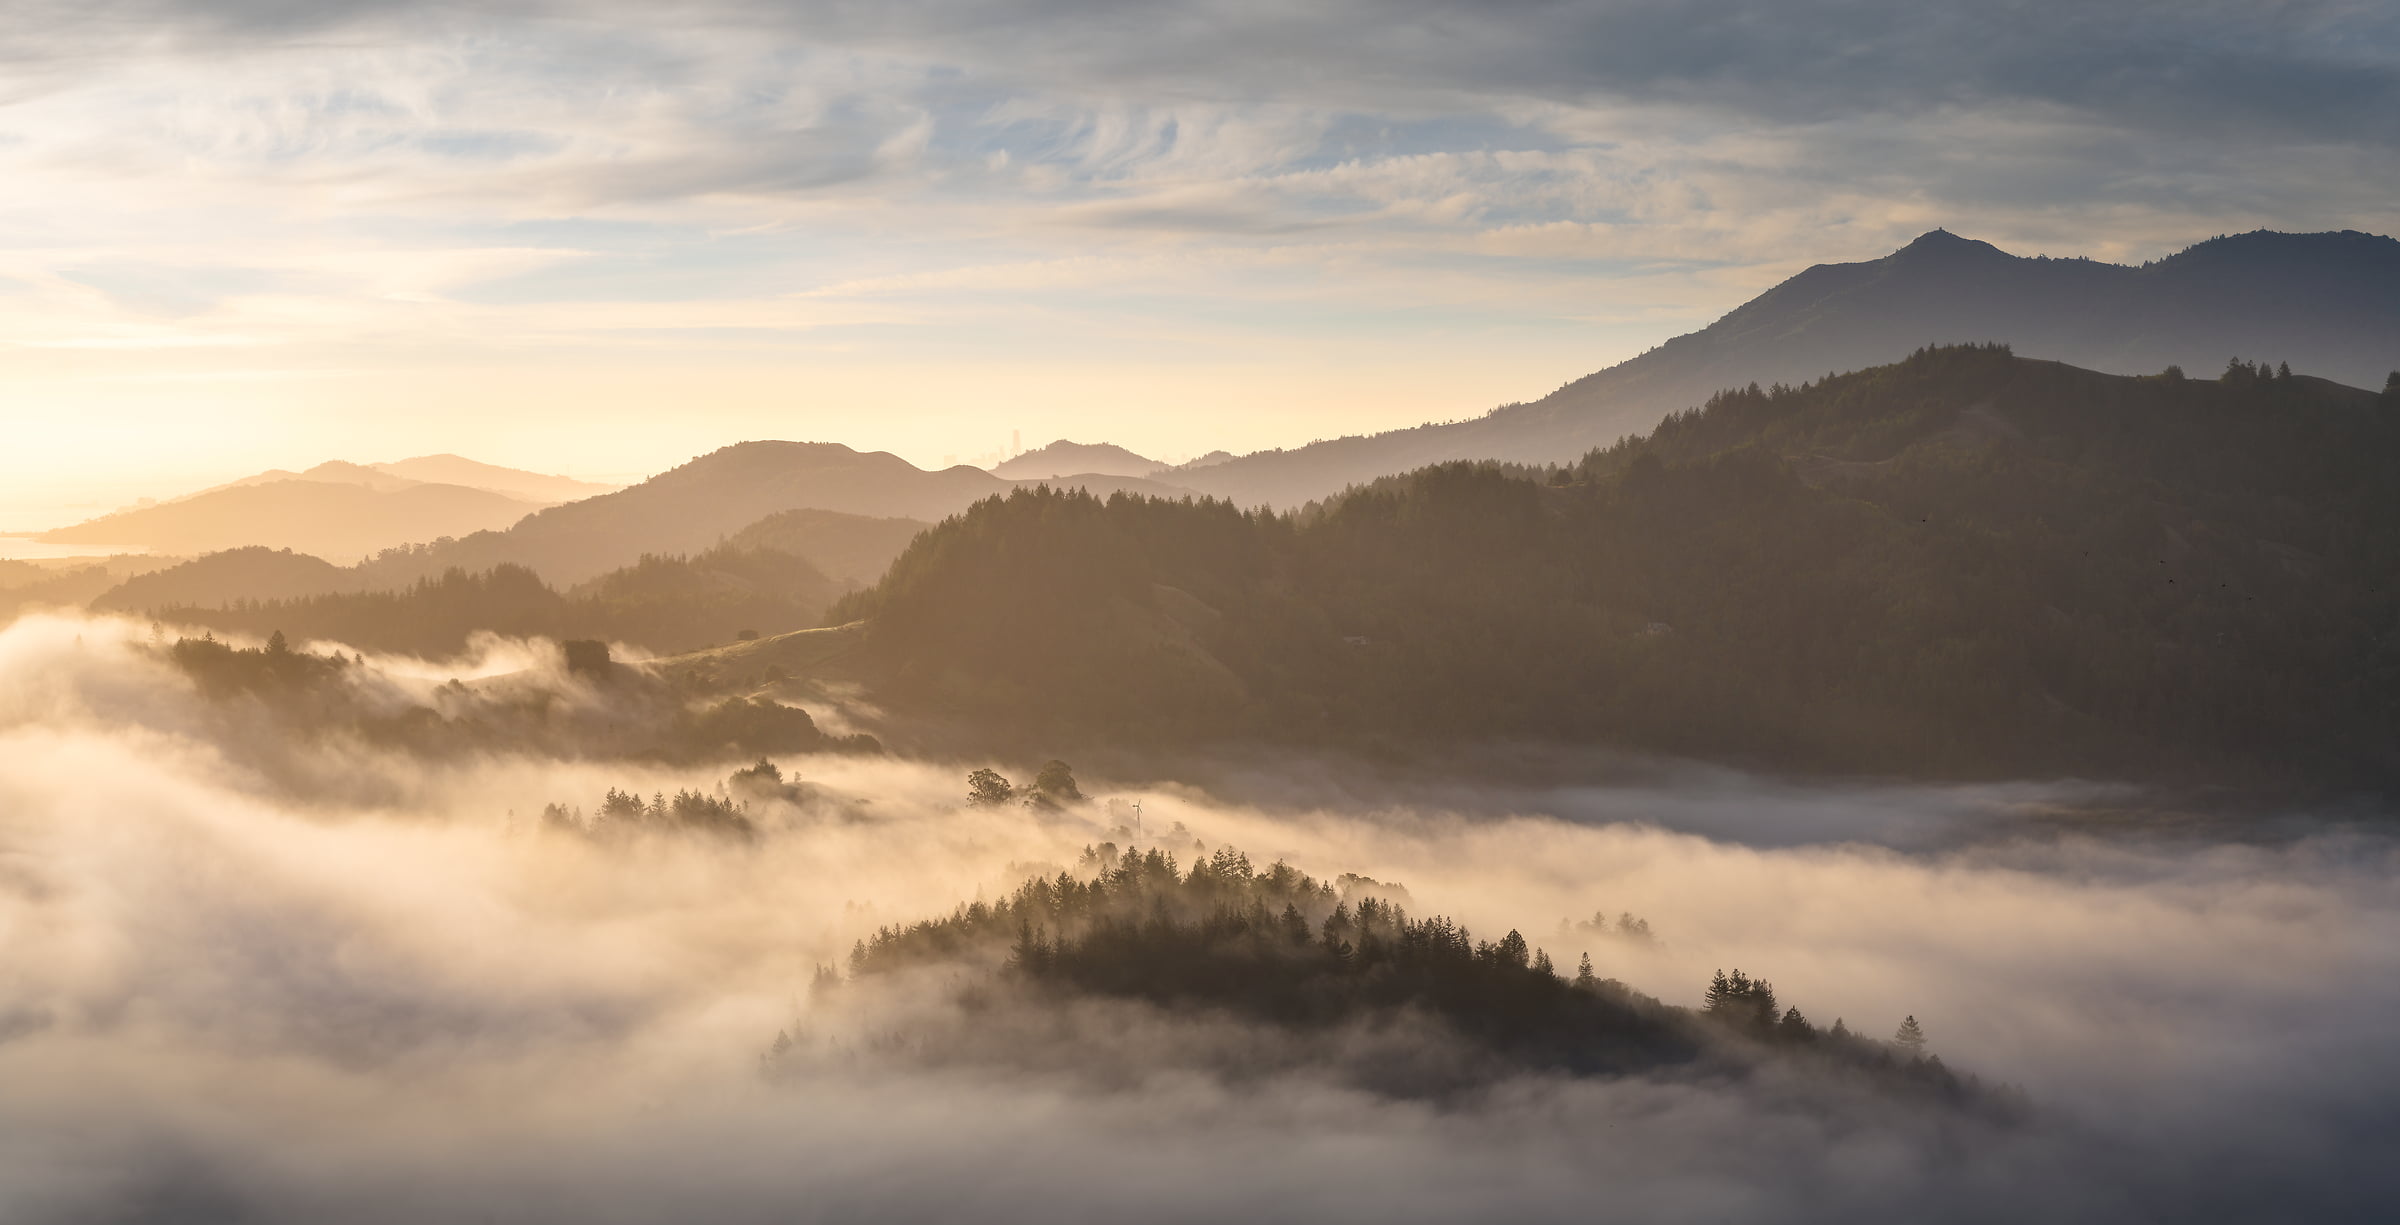 230 megapixels! A very high resolution, large-format VAST photo print of clouds and mountains; landscape photograph created by Jeff Lewis in Marin County, California.